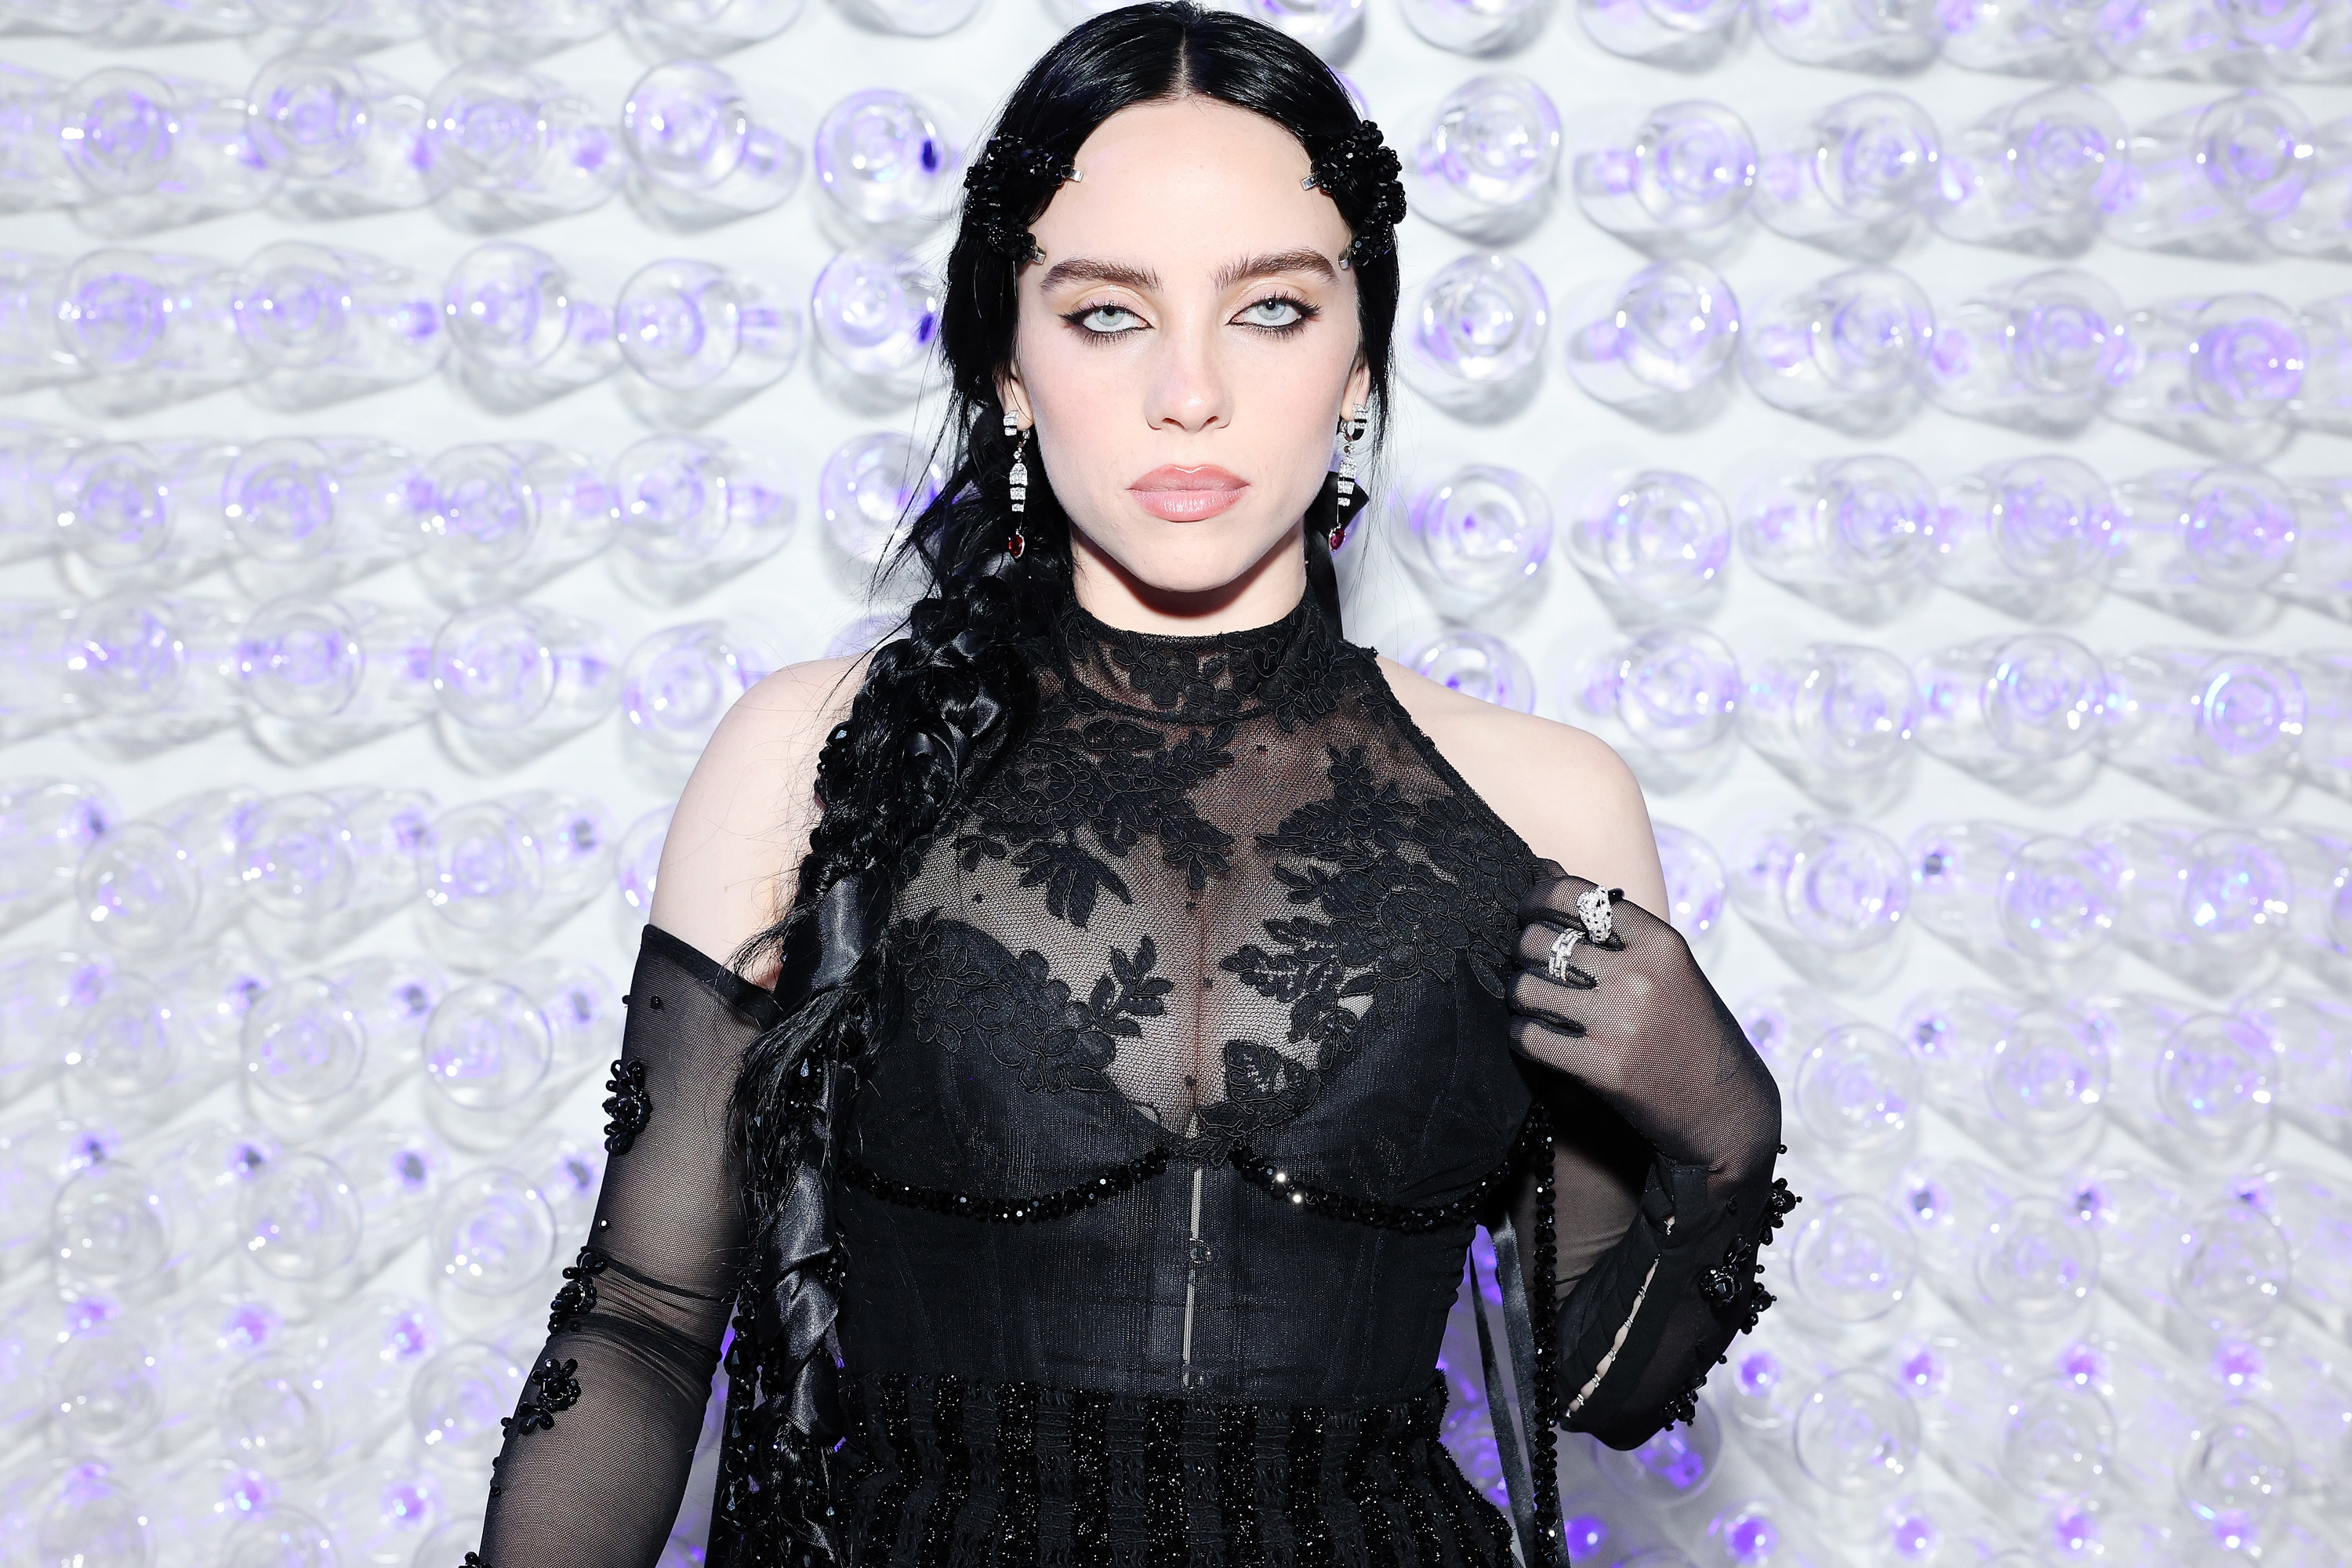 A closeup of Billie at the event